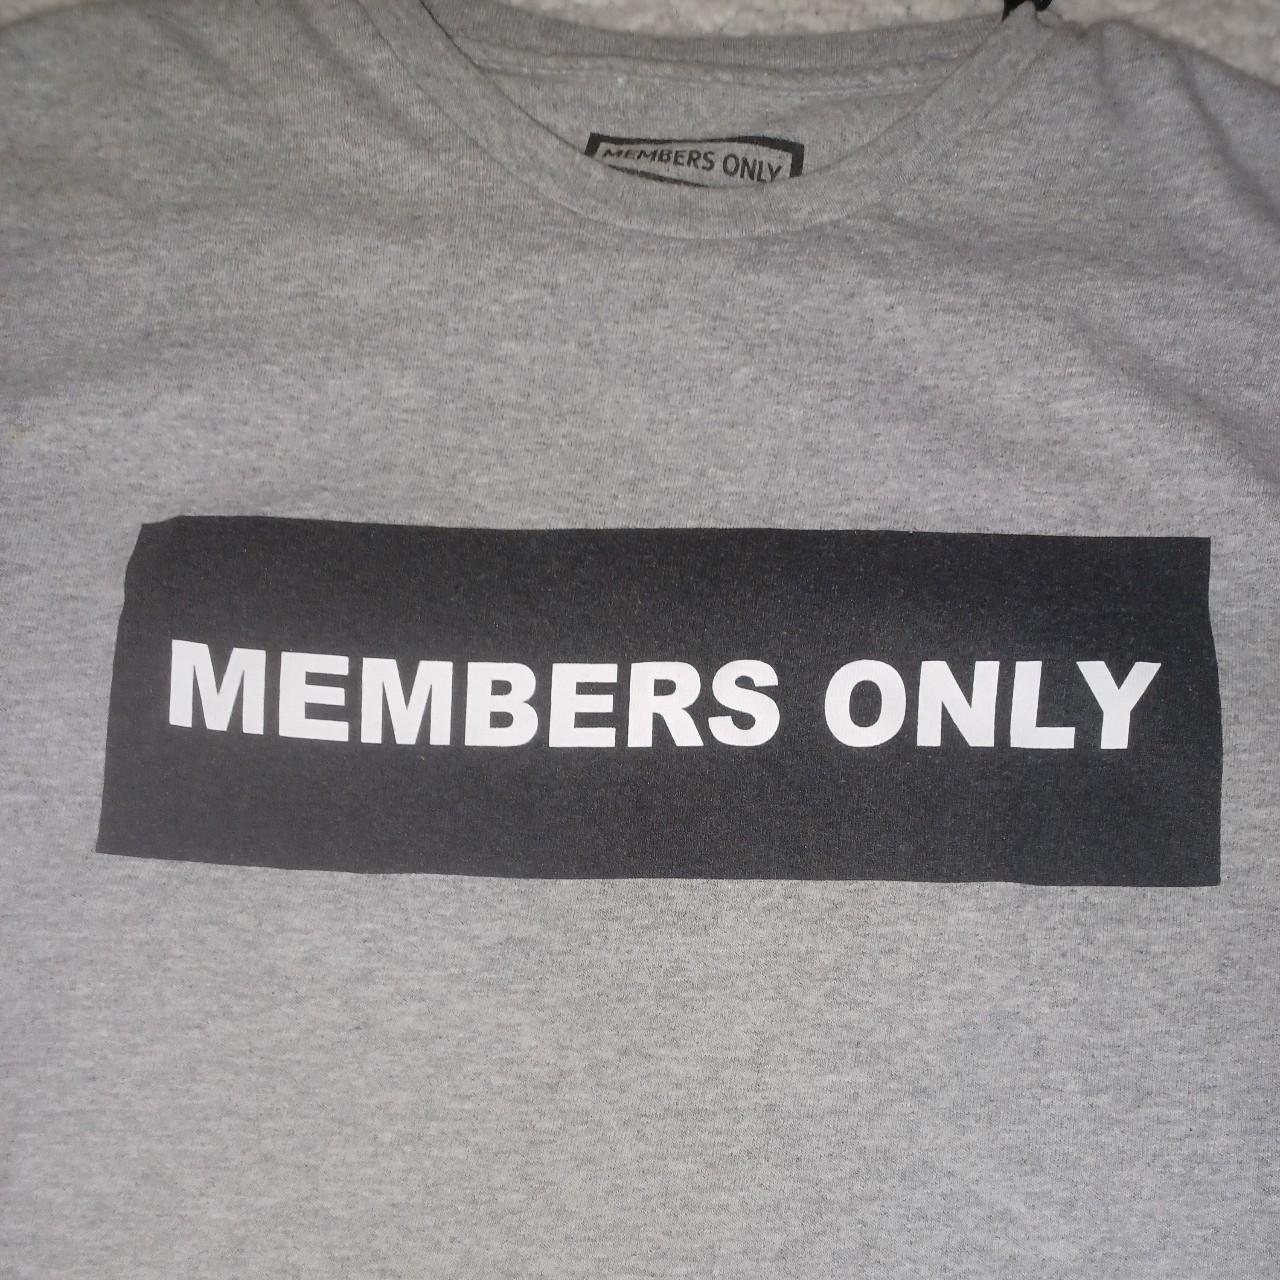 Members Only Men's Black and Grey T-shirt (2)